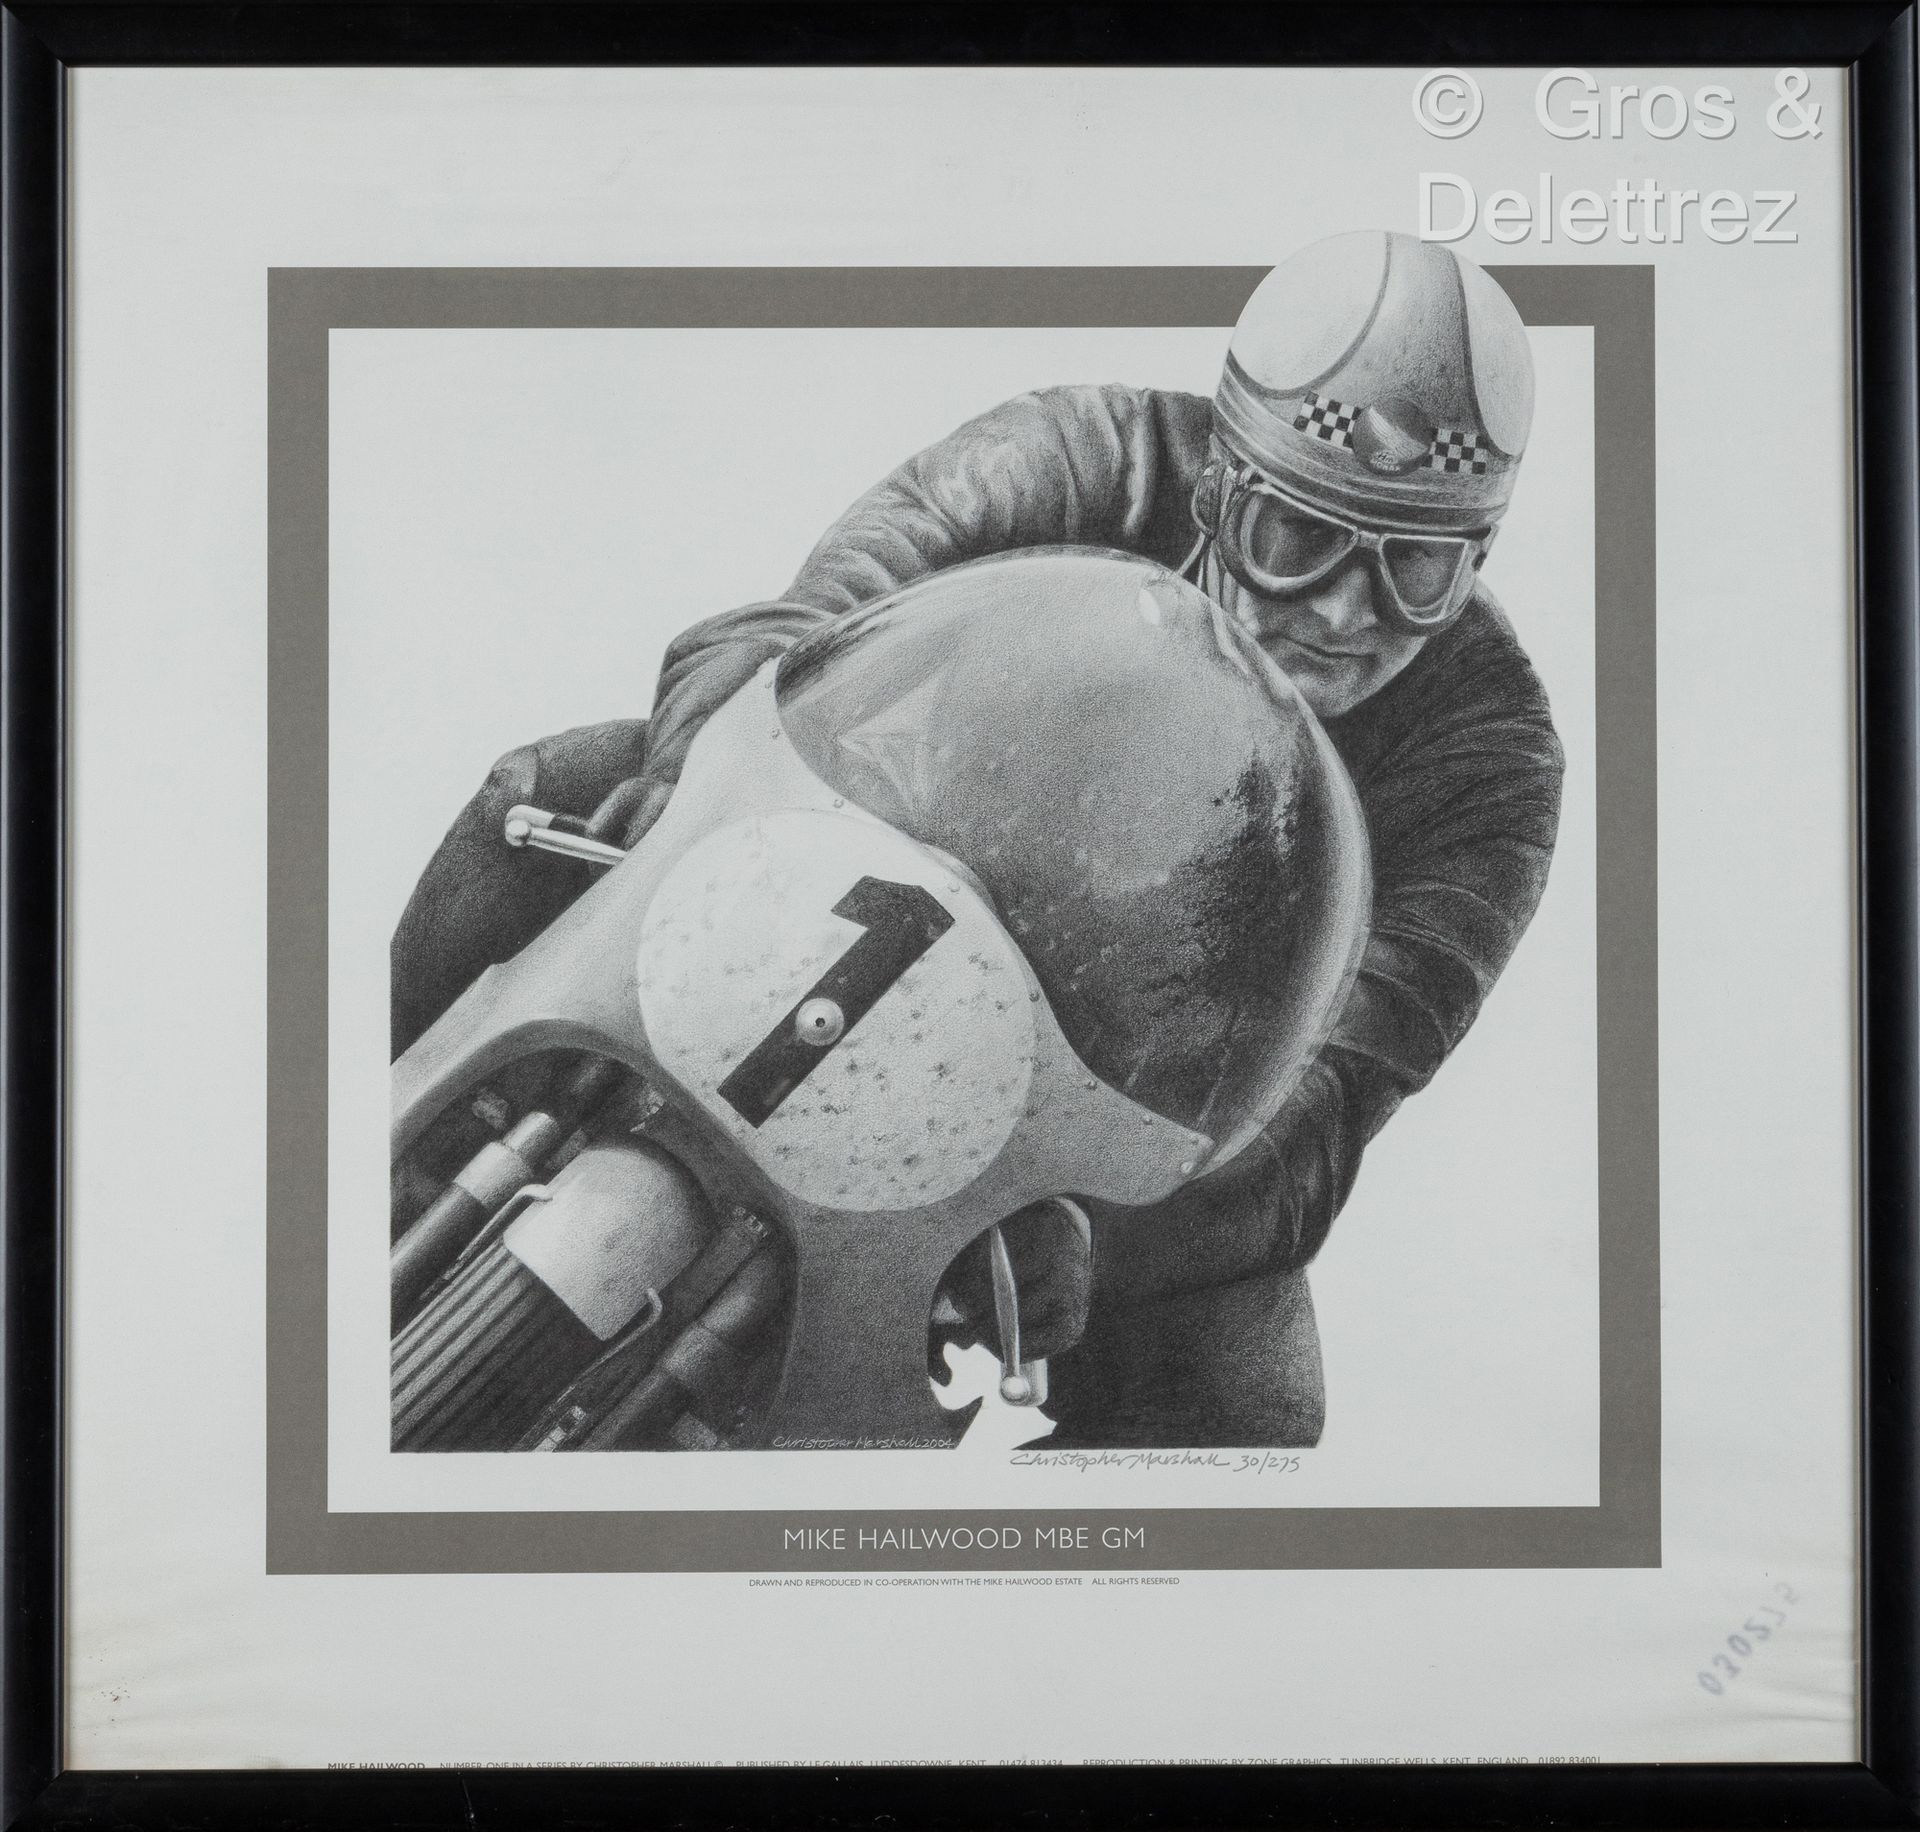 Null (SD) Christopher MARSHALL

Mike Hailwood MBE GM

Reproductions in black of &hellip;